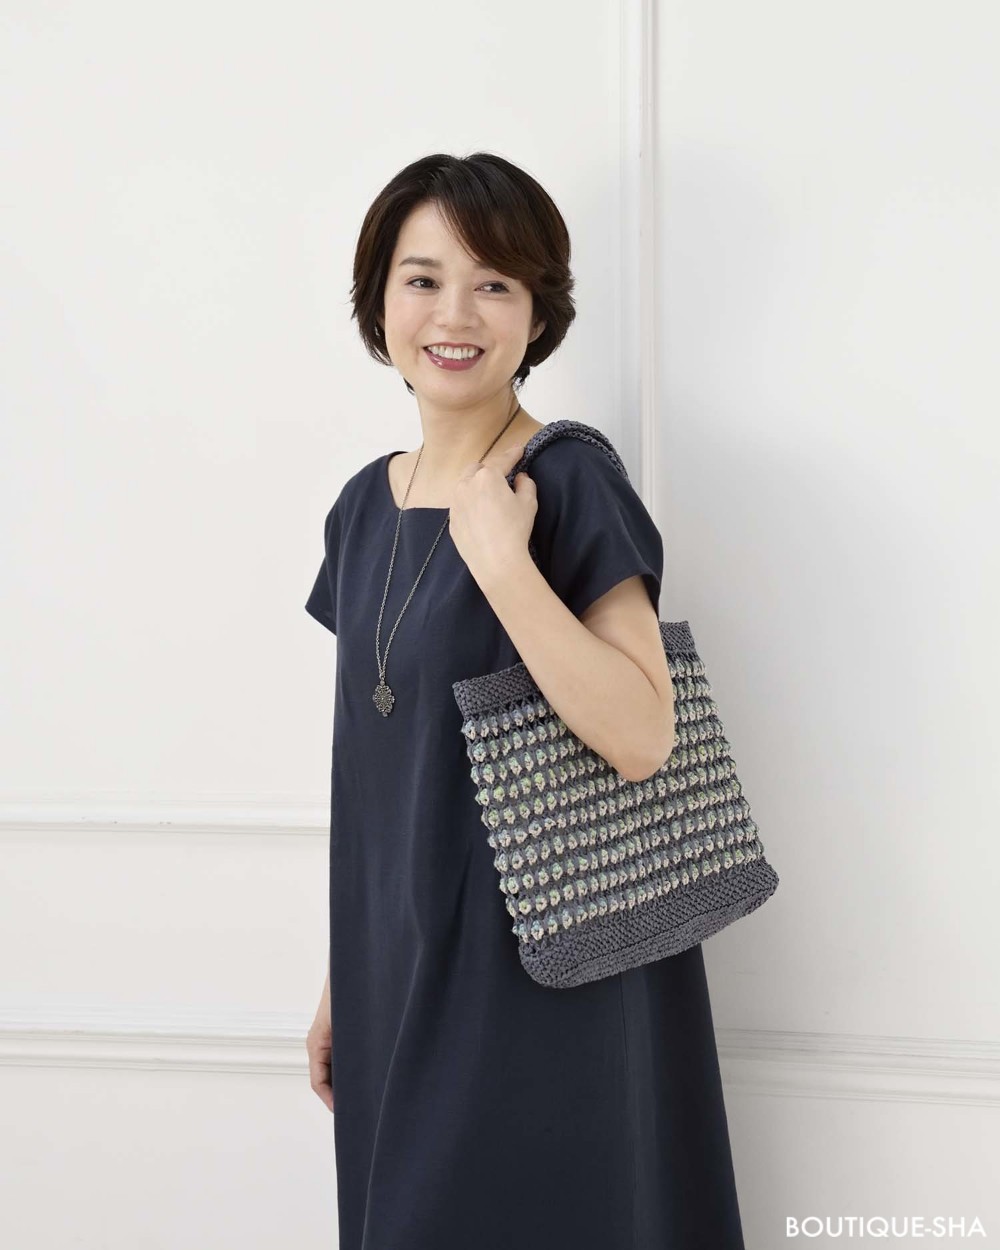 Spring / Summer * Mrs. Hand Knitting Collection 29 